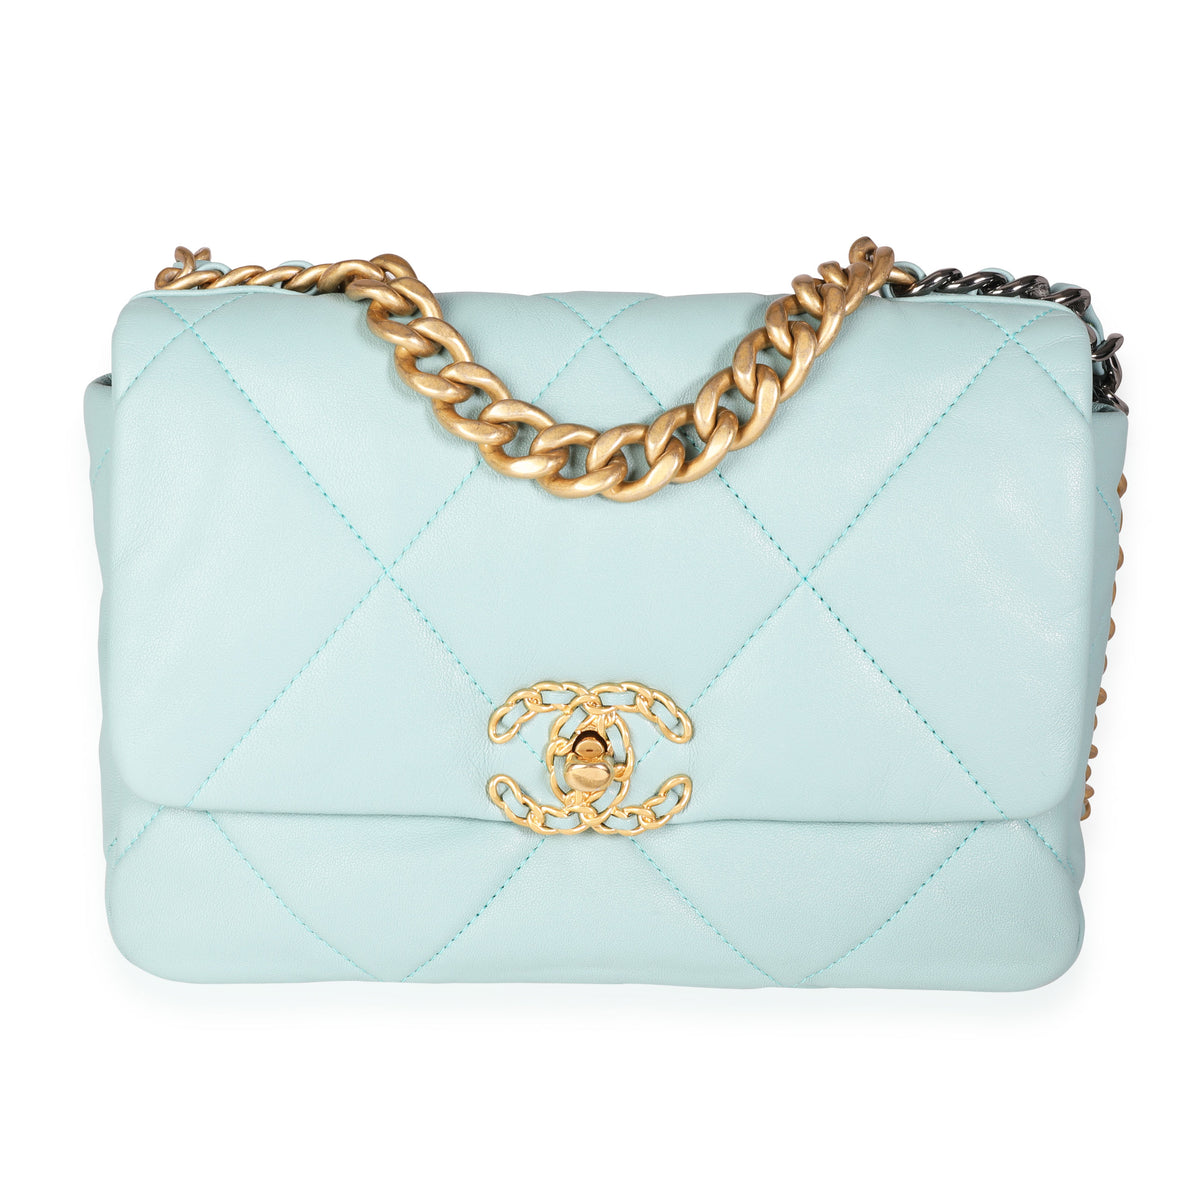 Chanel Pale Blue Quilted Lambskin Medium Chanel 19 Bag